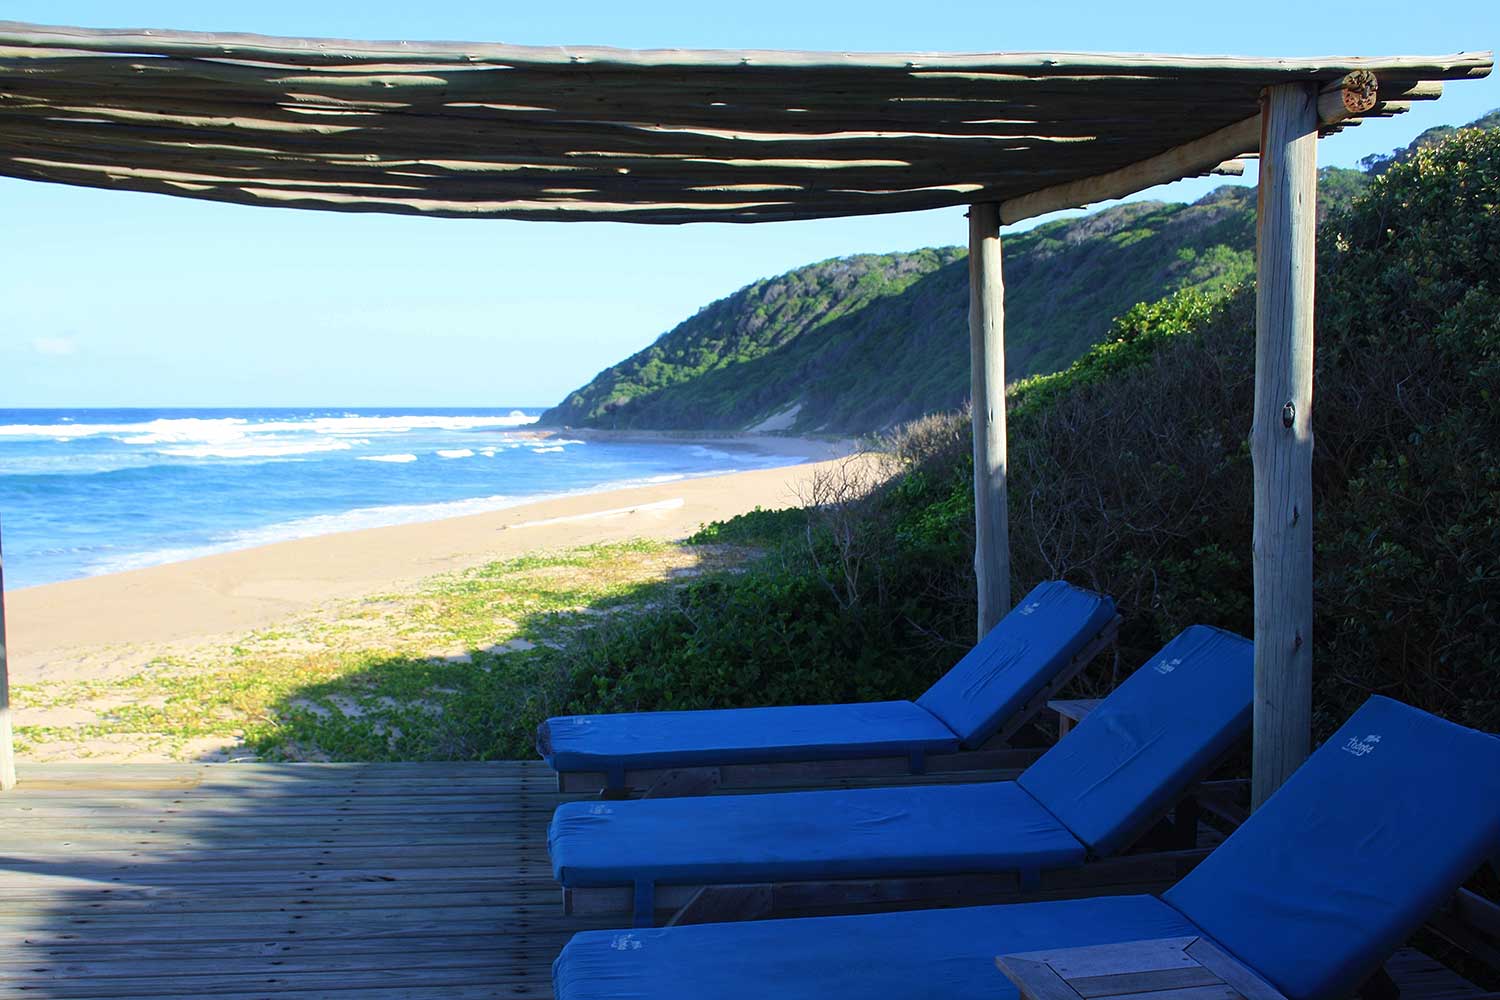 You will find Thonga blue everywhere at the lodge, where the decor reflects the unique blue-green colour of the sea